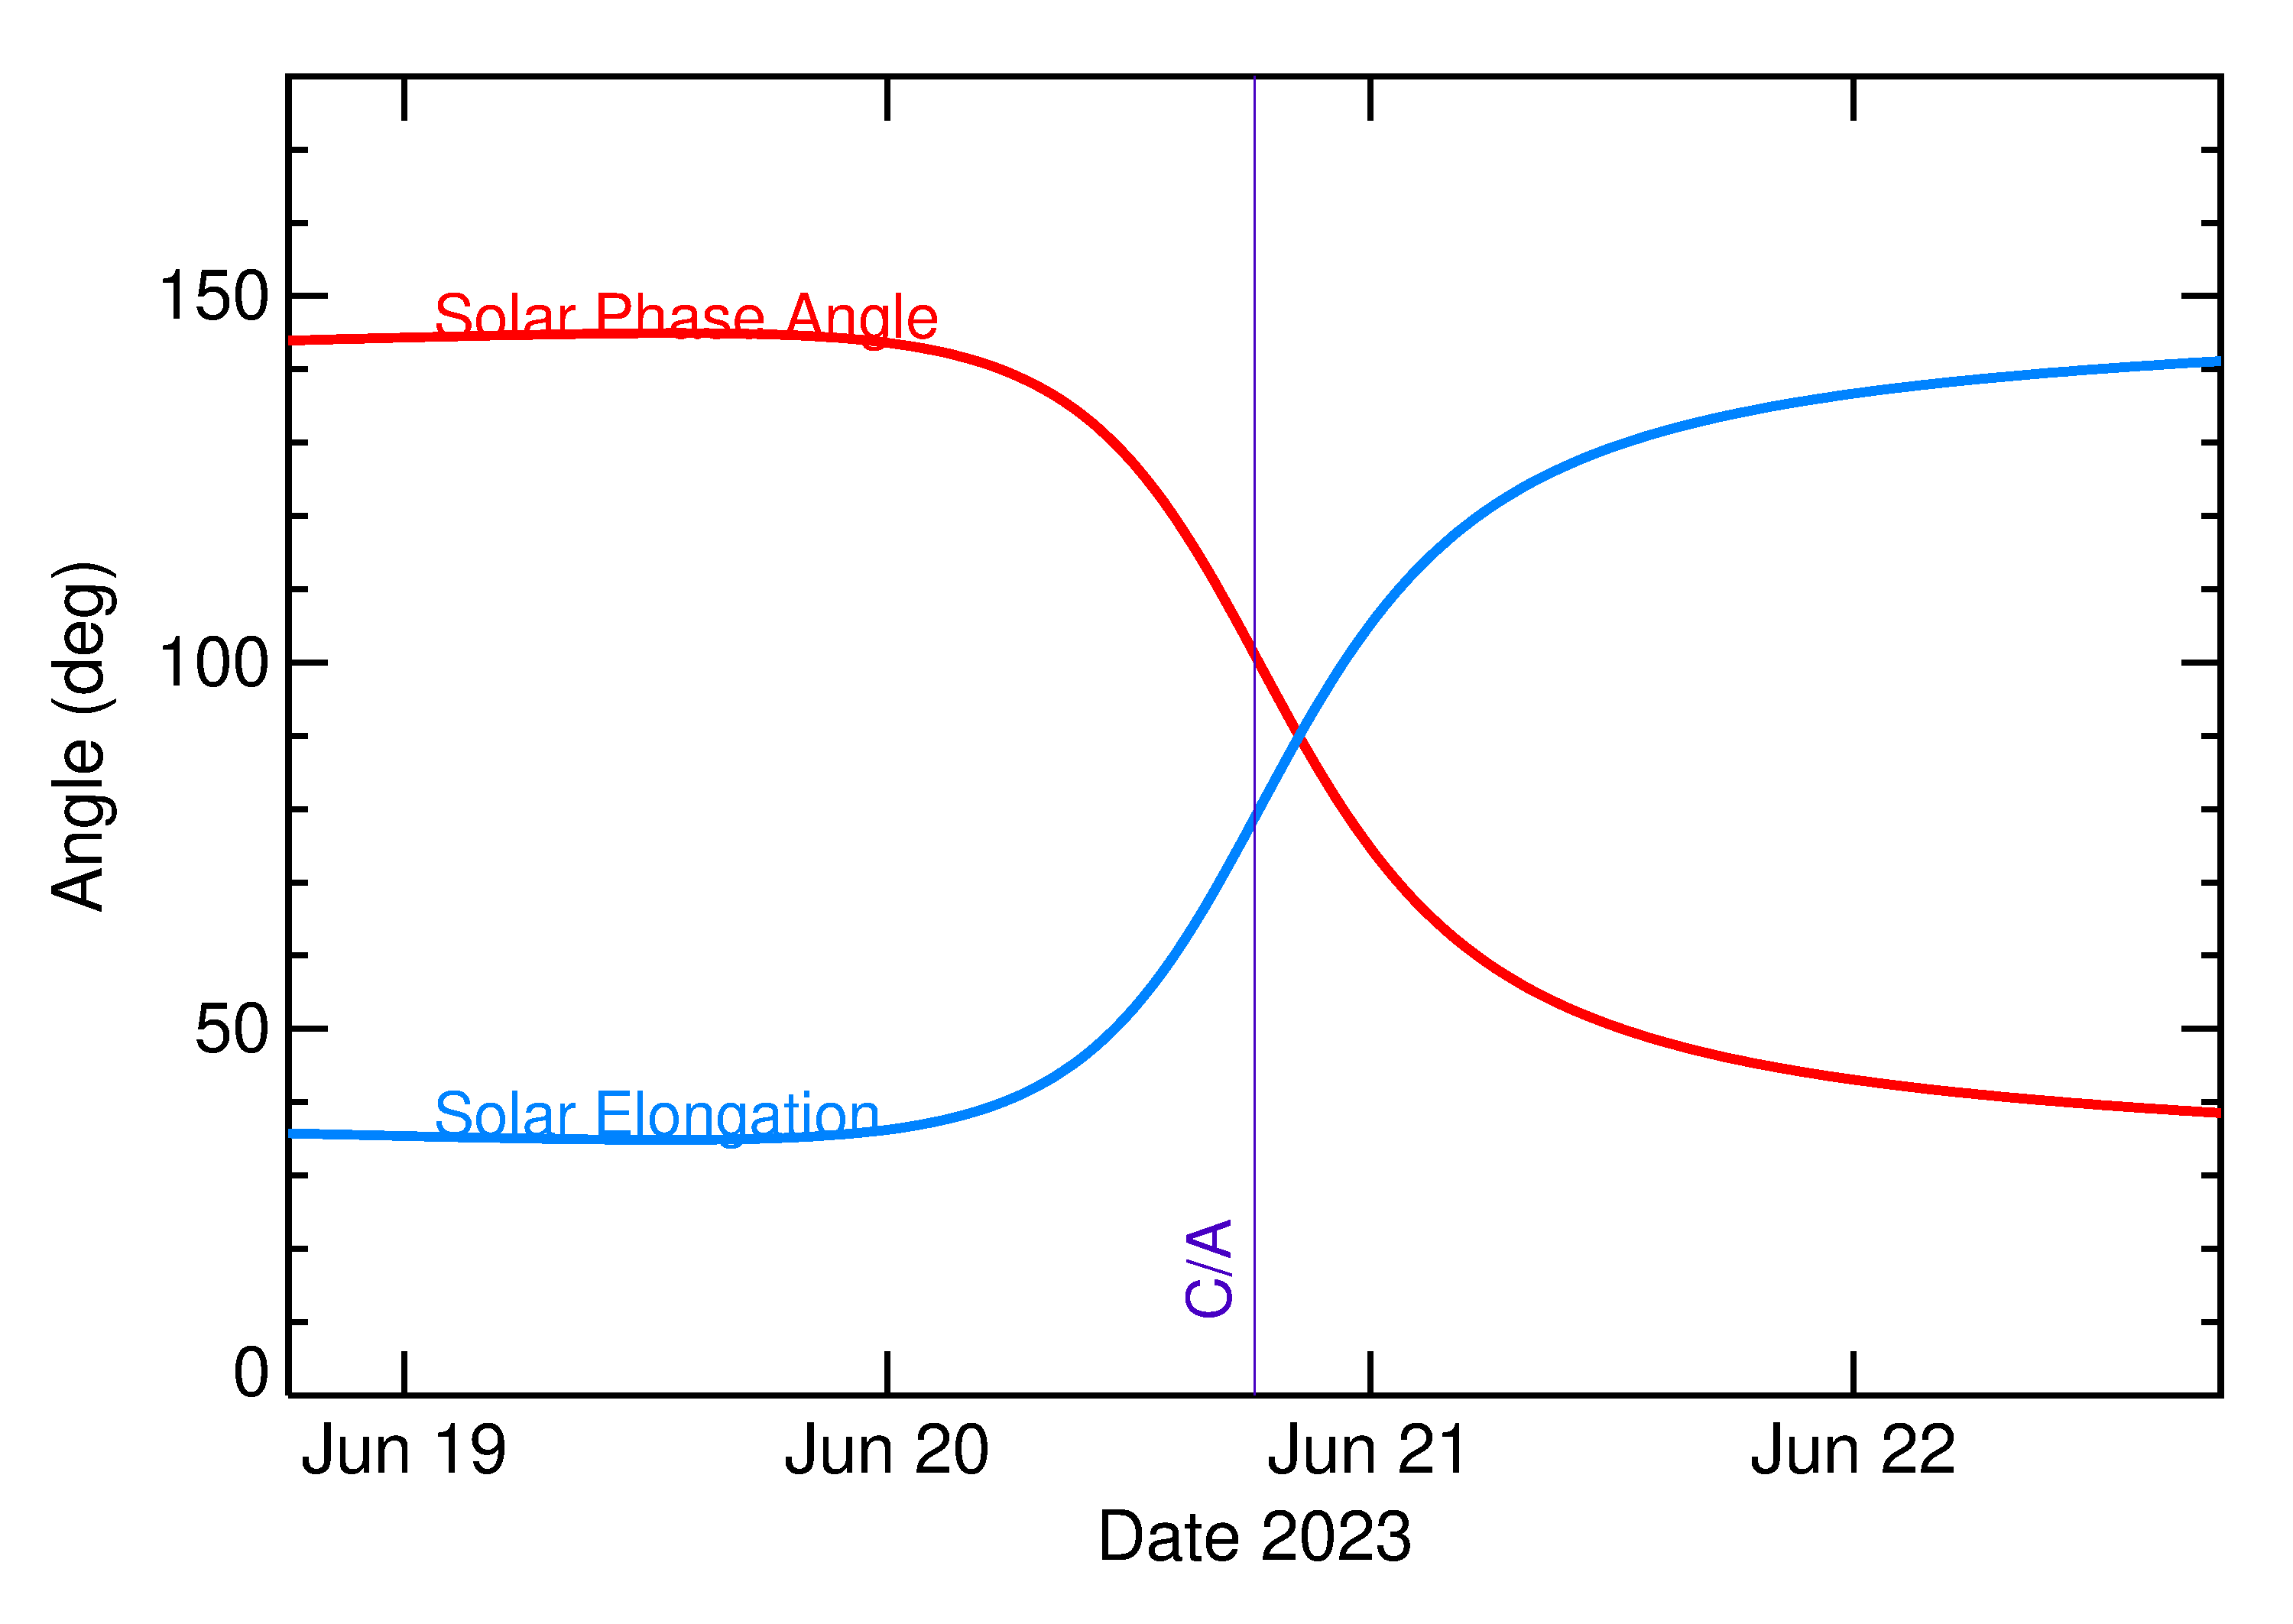 Solar Elongation and Solar Phase Angle of 2023 MD4 in the days around closest approach